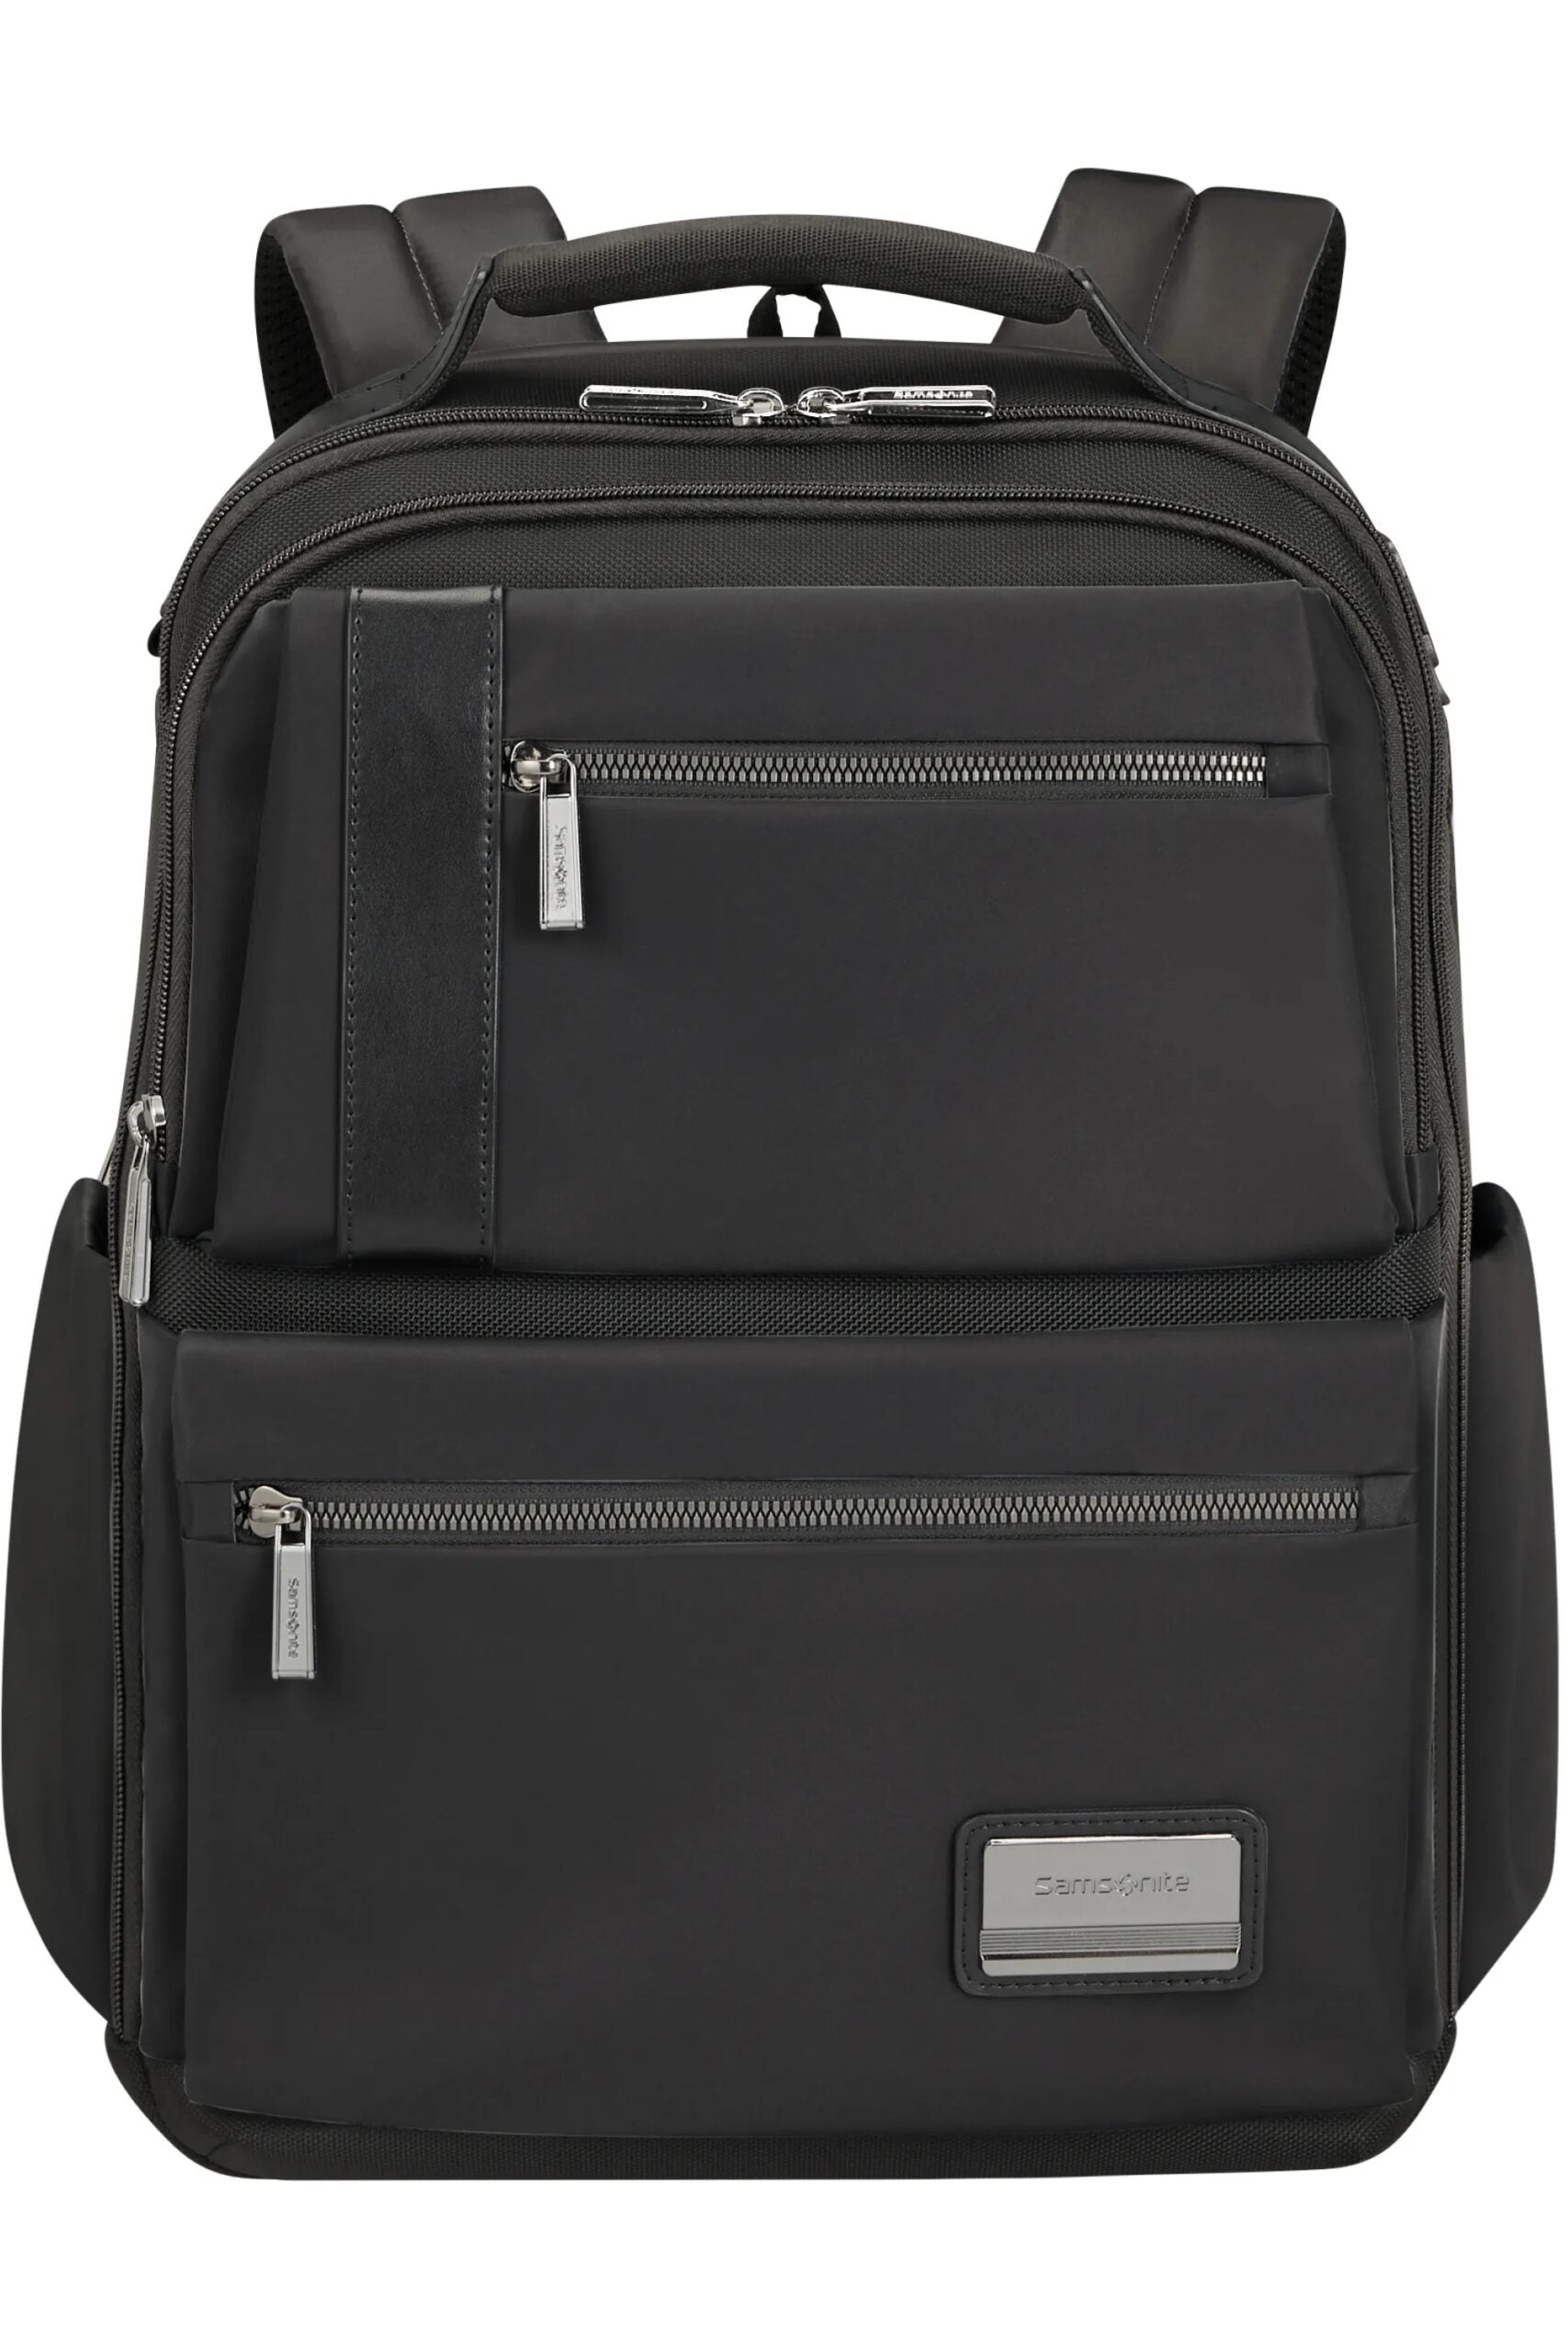 Openroad backpack 14.1 1